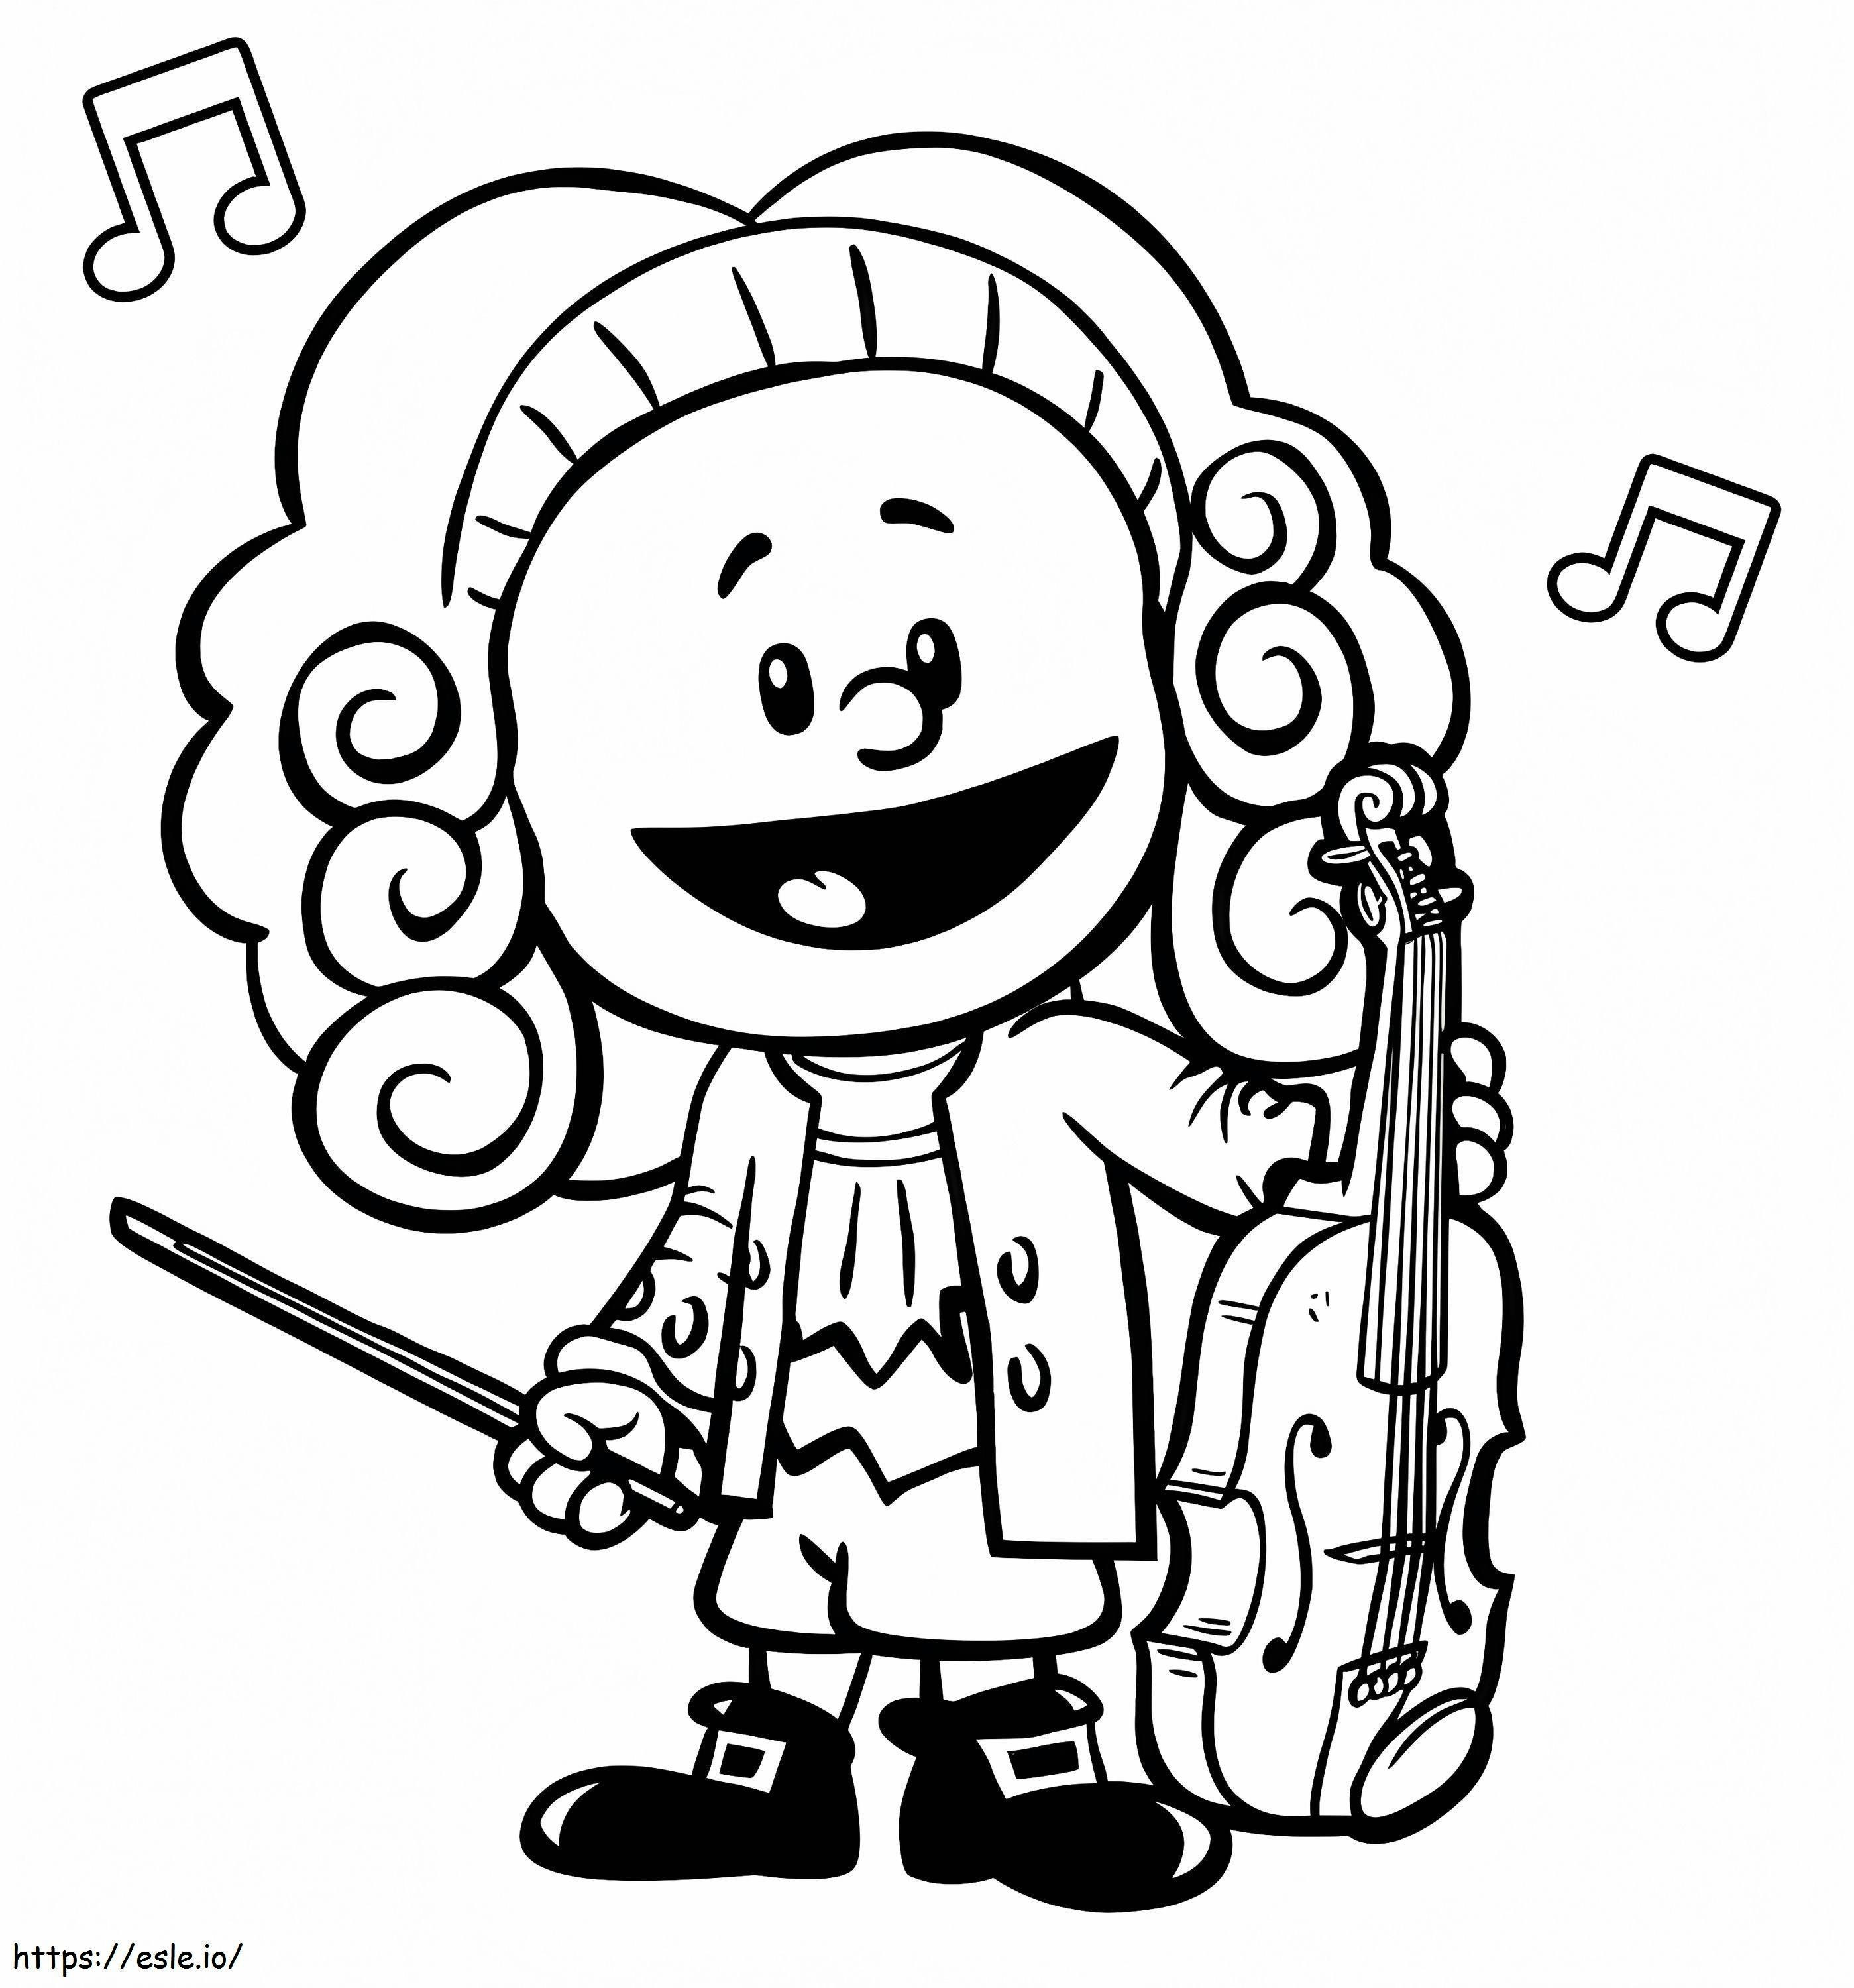 Johann Sebastian From Xavier Riddle coloring page